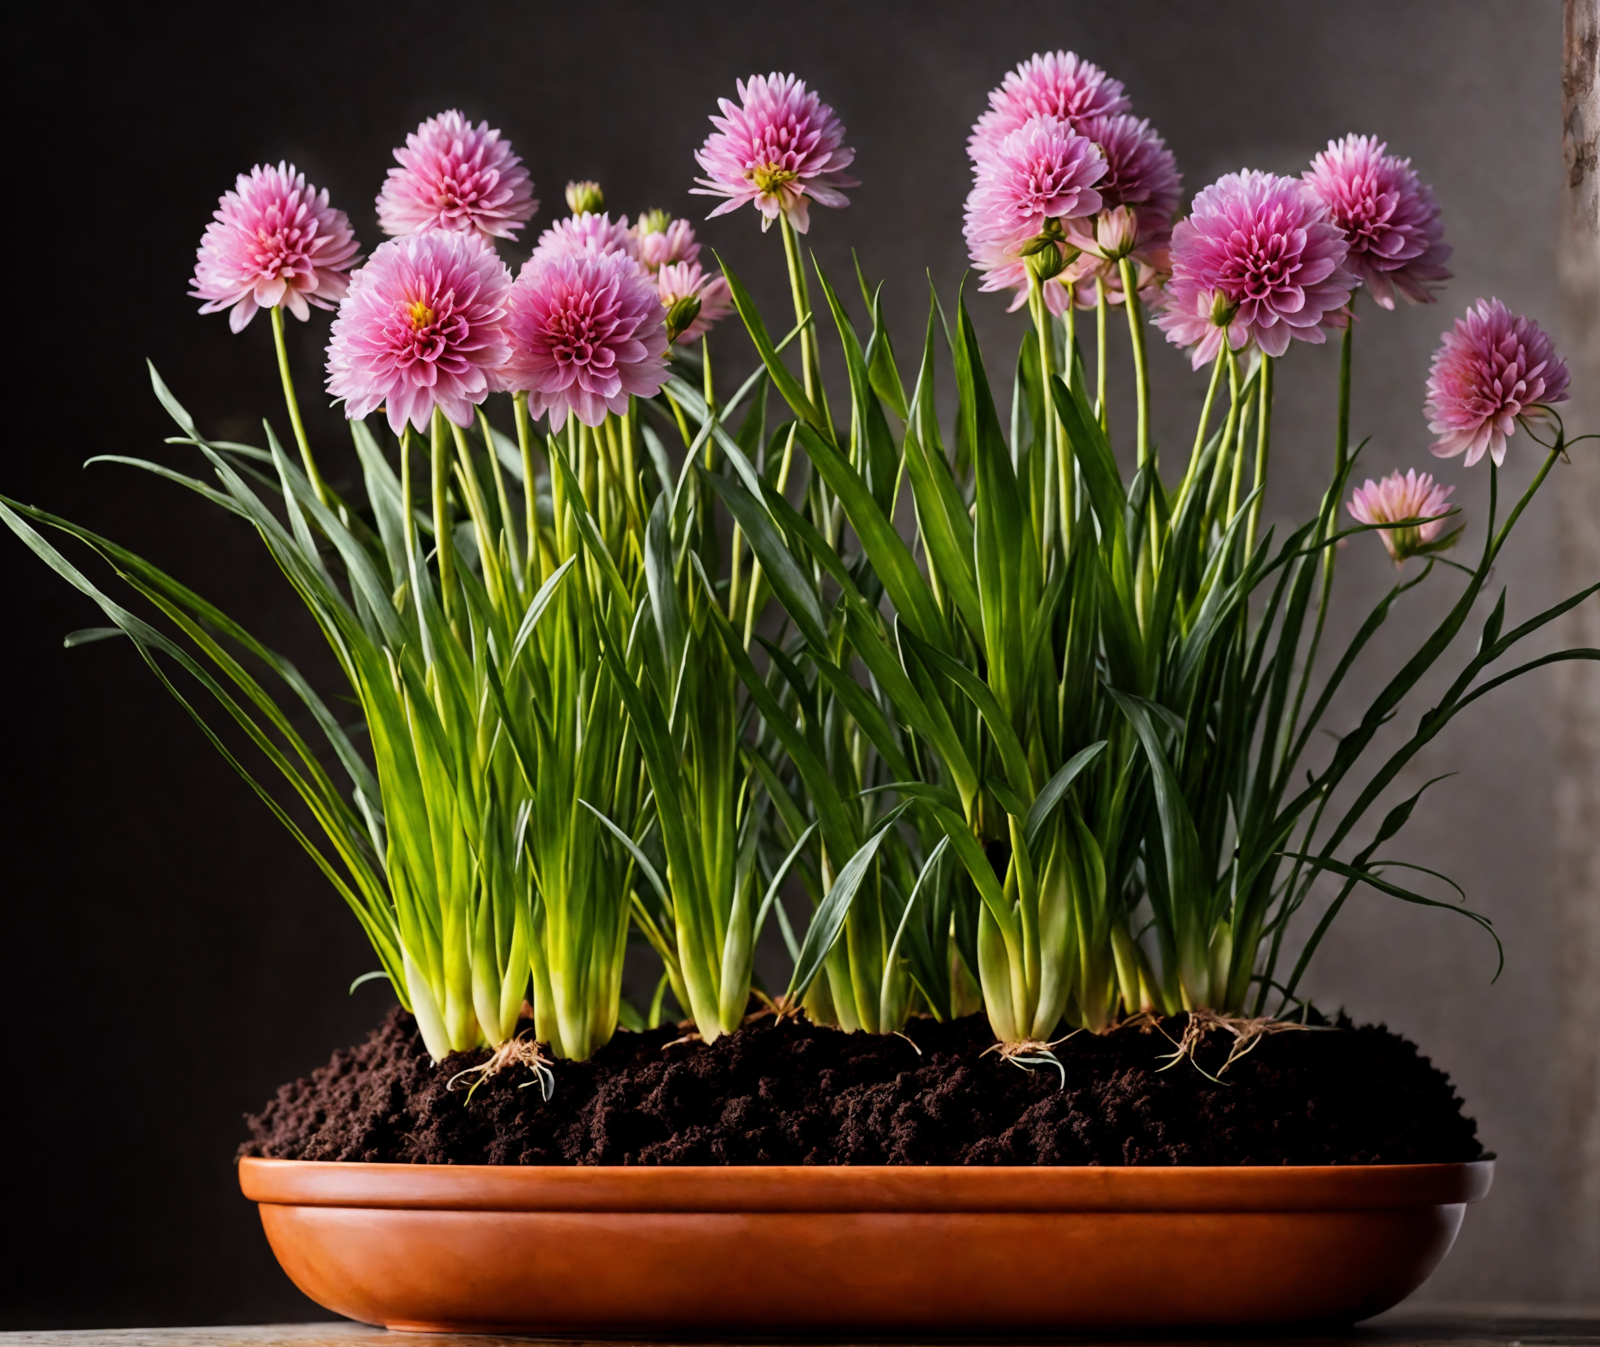 A bowl of pink Allium schoenoprasum flowers on a table, with clear lighting and a dark background.